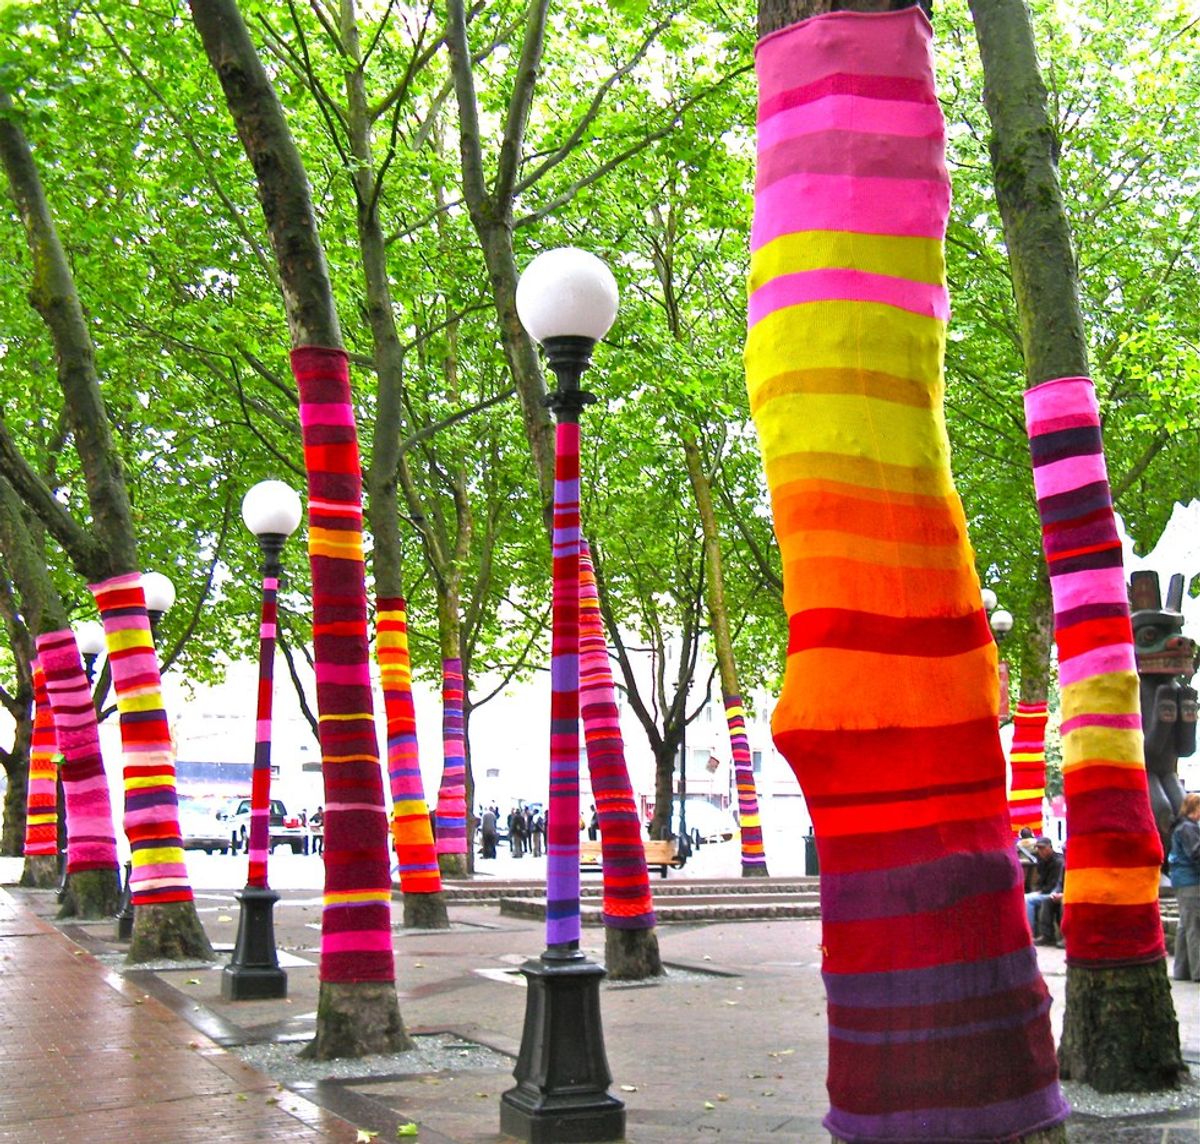 'Yarn Bombing' Is The New Graffiti, But Is That OK?